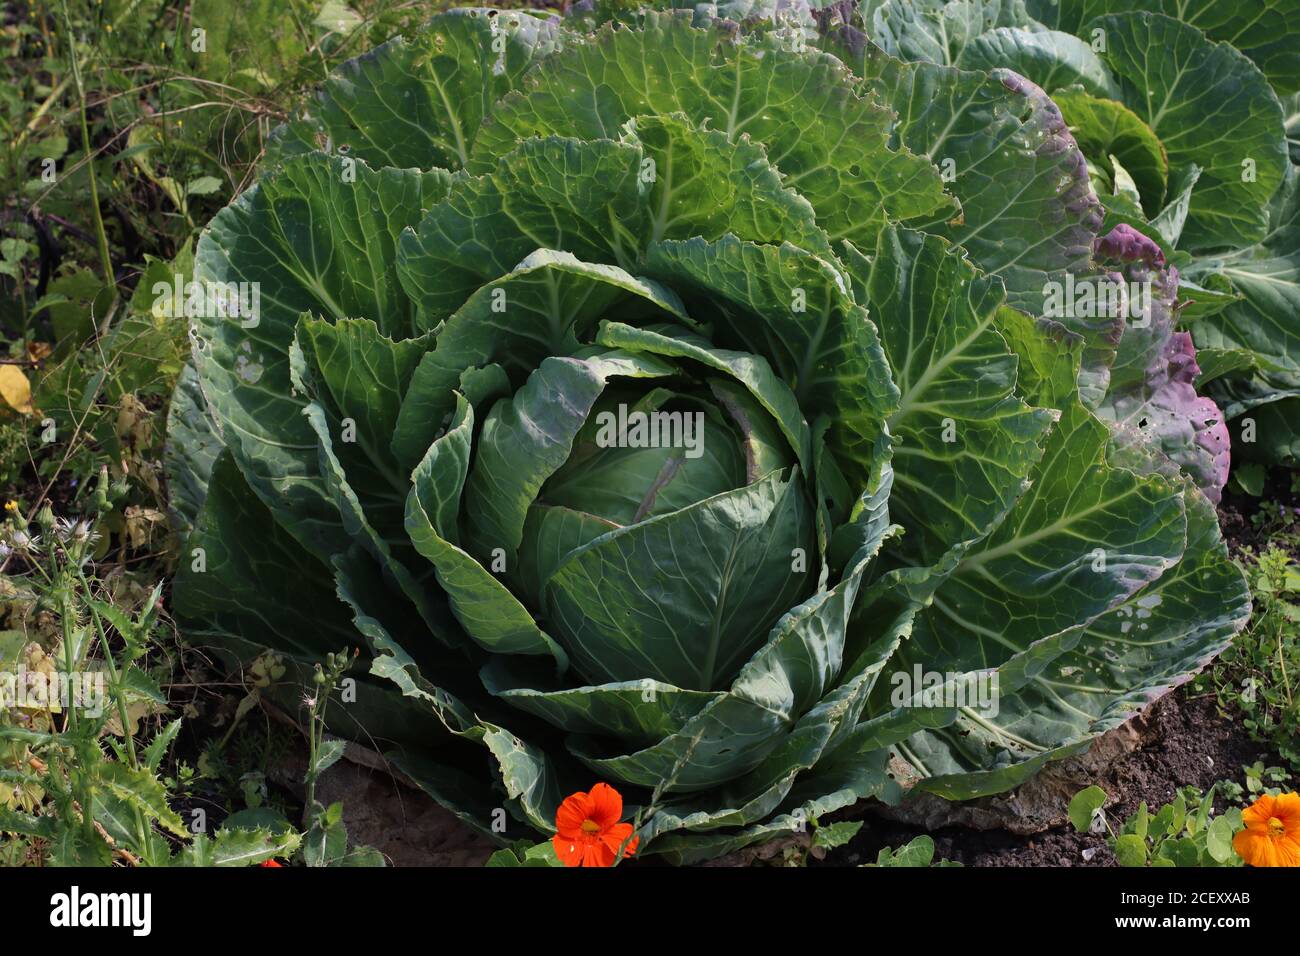 Landscape of a very large cabbage brassica, in the garden surrounded by nasturtiums Stock Photo